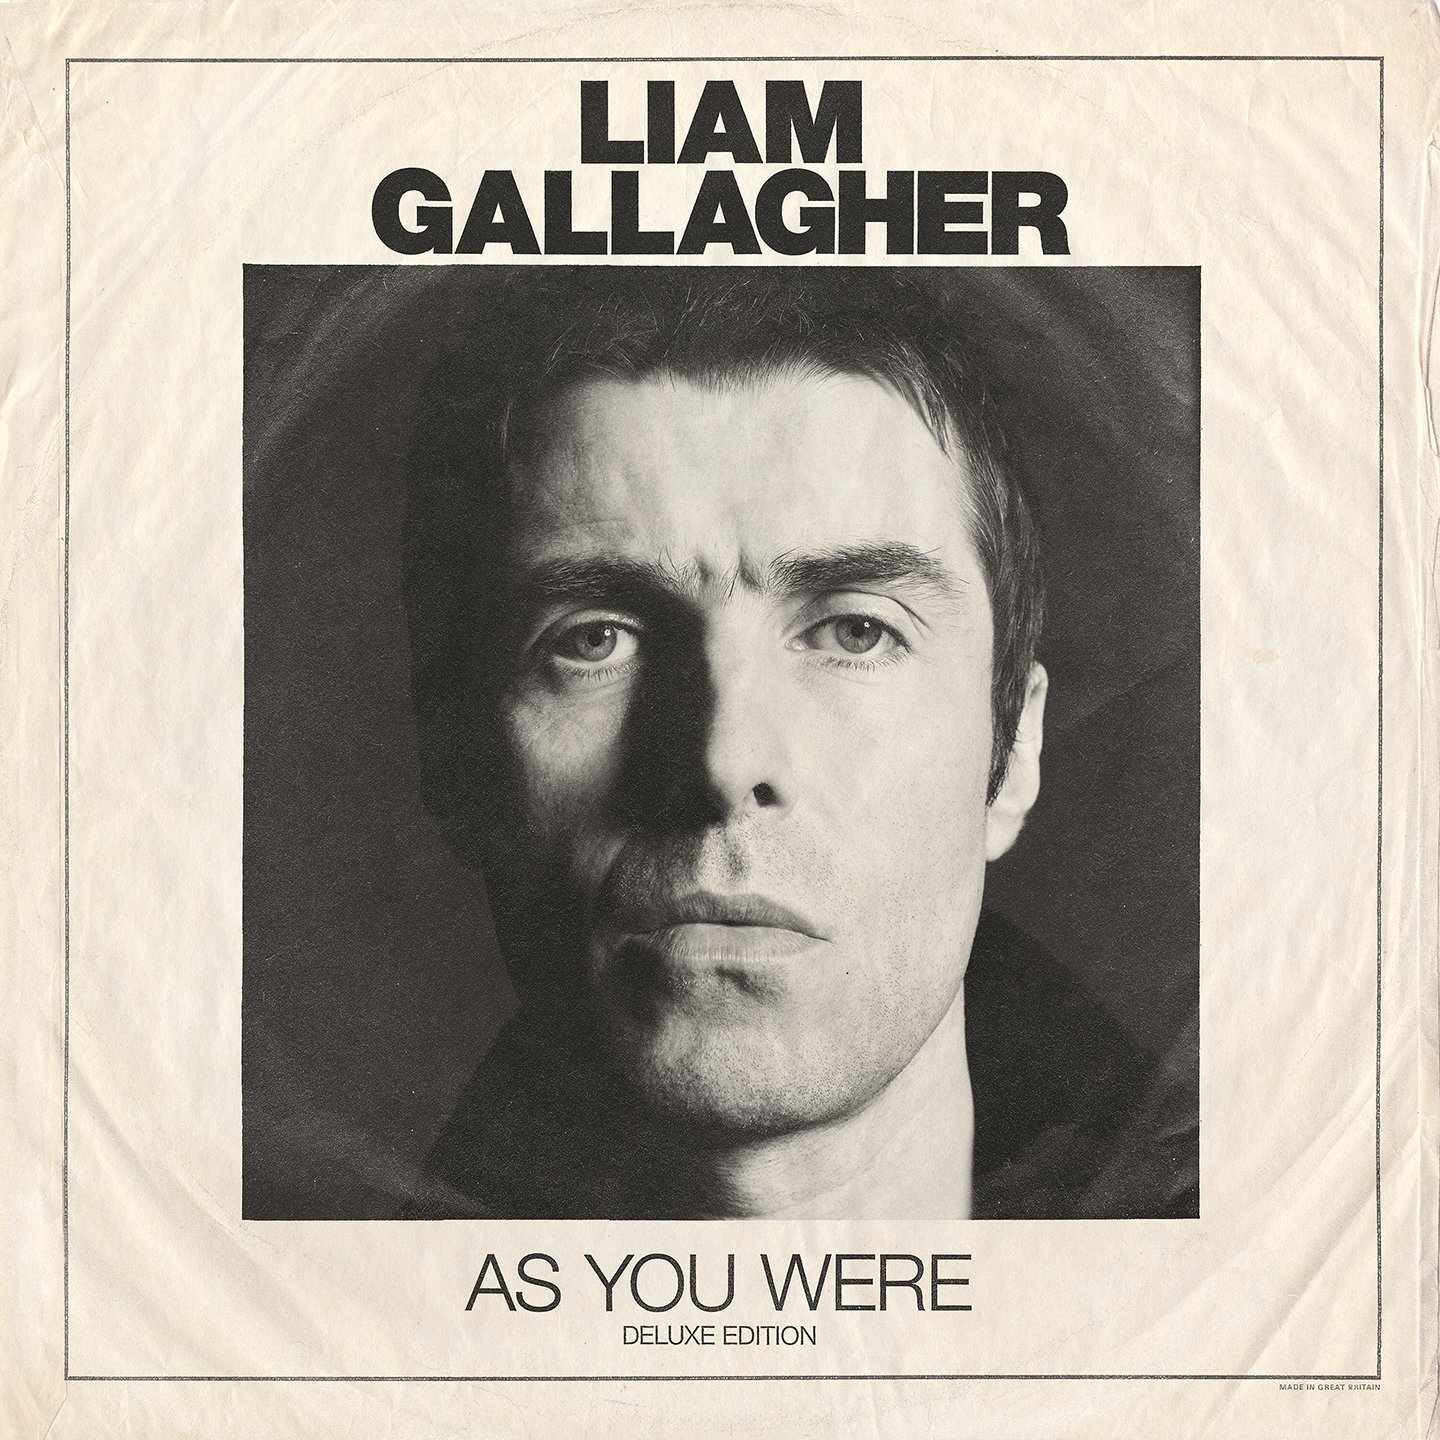 Liam Gallagher - As You Were {Deluxe Edition} (2017) [HDTracks FLAC 24bit/44,1kHz]